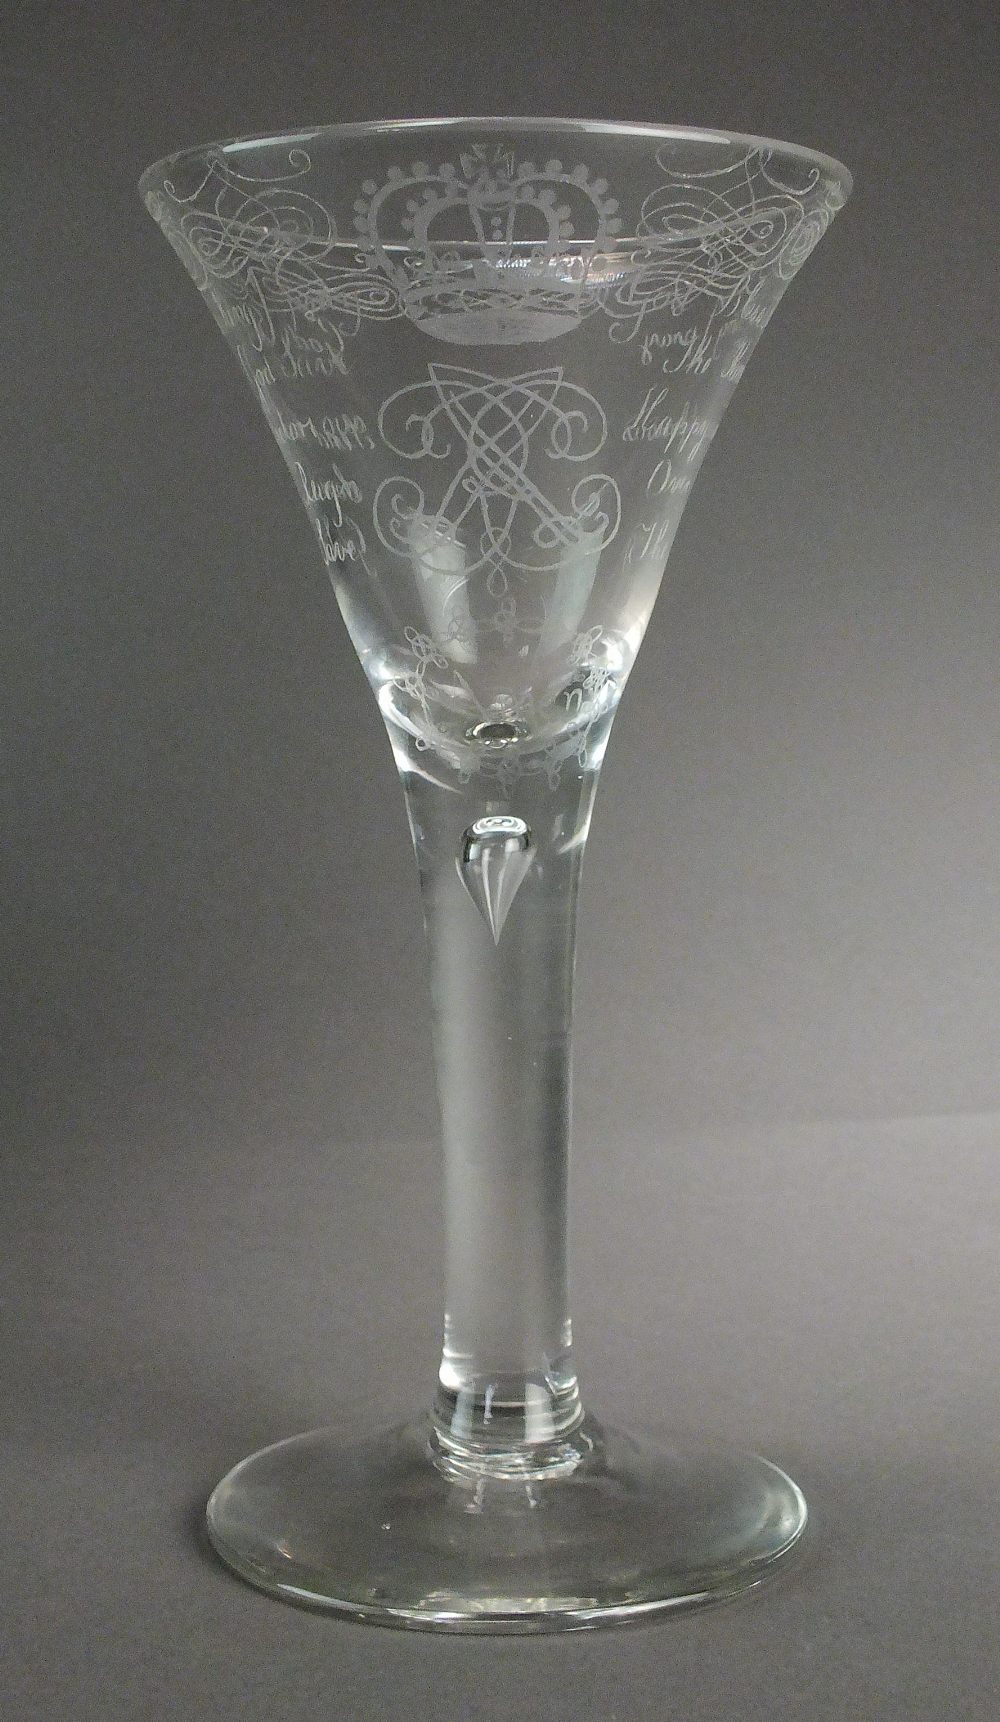 A reproduction 'Amen' style glass, inscribed with the verse 'God Save the King, God Bless the King,